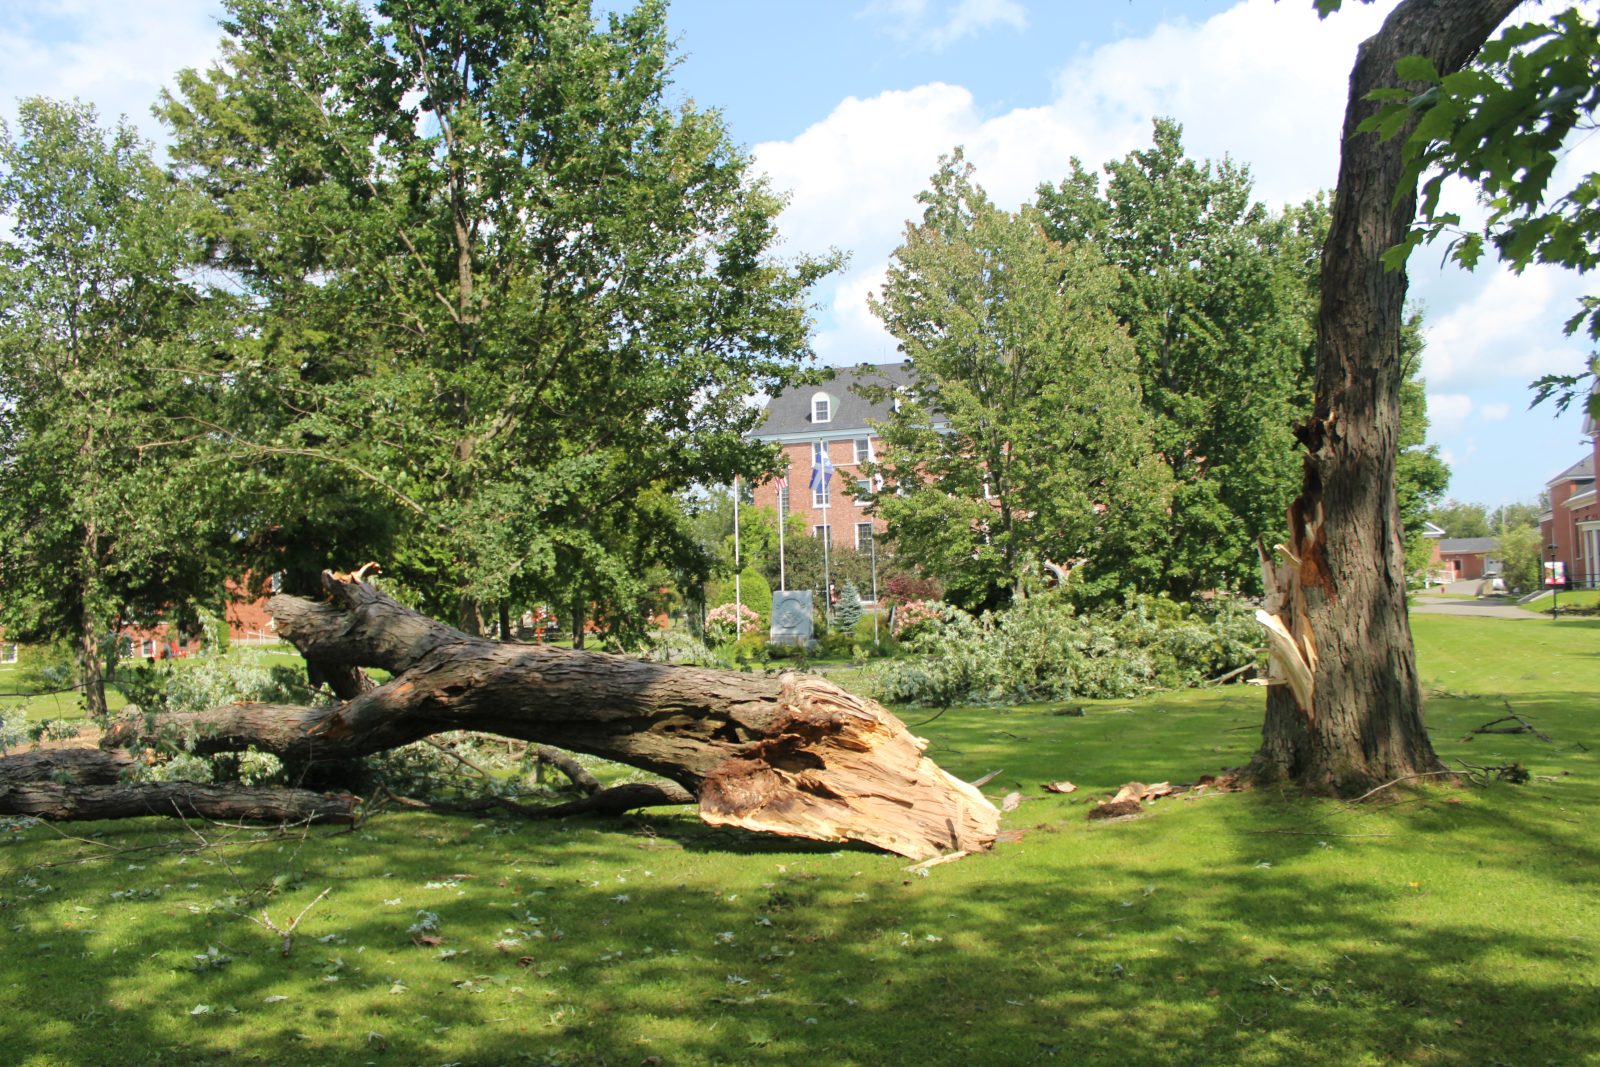 Recent wind damage to Stanstead caused by microburst